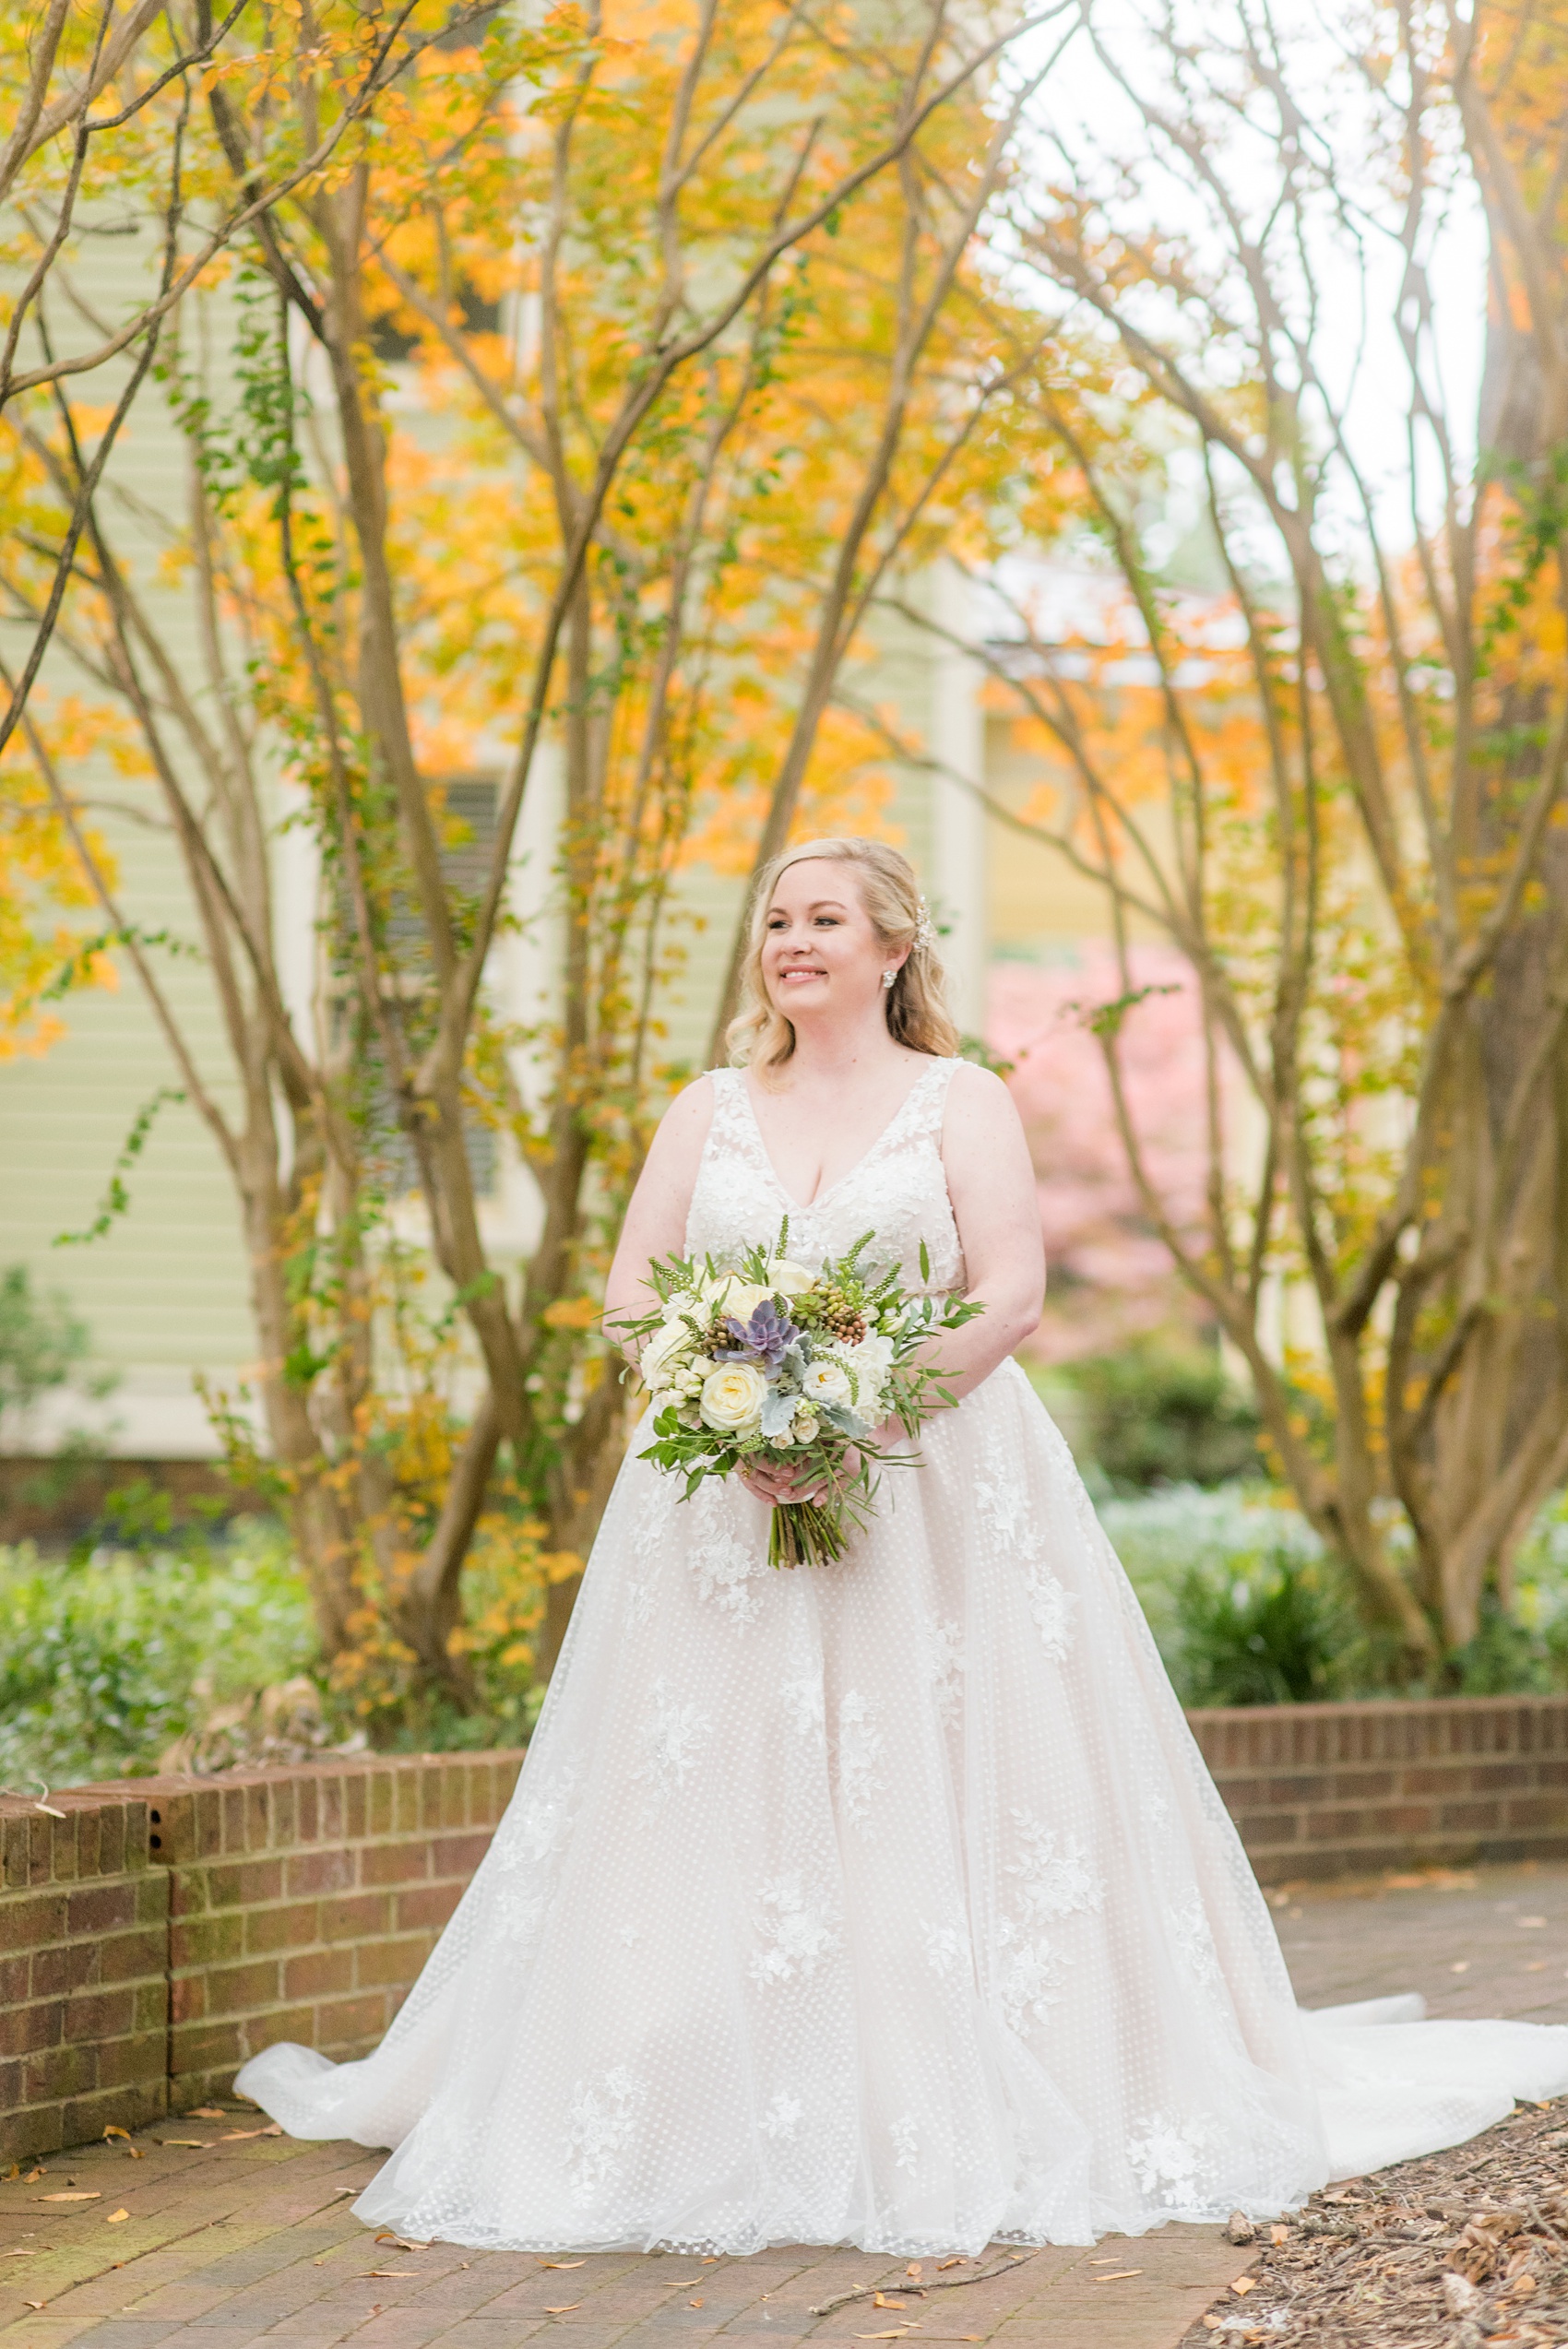 Mikkel Paige Photography captures a beautiful bridal portrait for a fall wedding in Downtown Raleigh, North Carolina. All Saints Chapel was their reception venue that they decorated with gold and silver decor and autumn centerpieces. Couple portraits were taken outdoors and the fun event continued inside the unique, and historic venue. Click through for all the details from this amazing celebration! #MikkelPaige #RaleighWeddingPhotographer #RaleighWeddingVenue #DowntownRaleighWedding